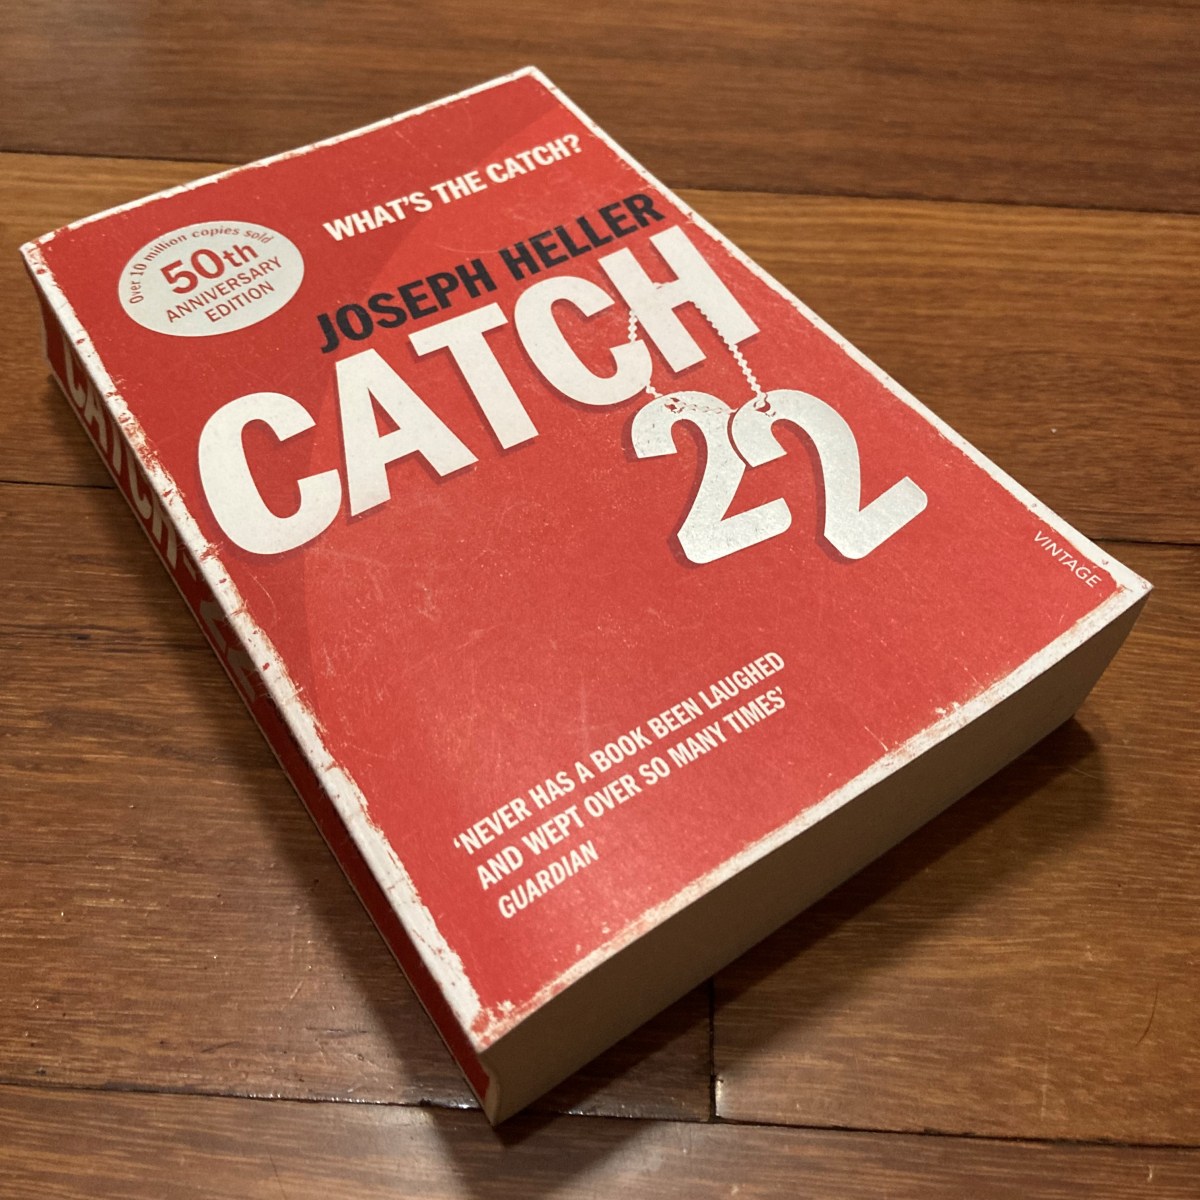 The novel Catch-22 by Joseph Heller, against a wood backdrop.